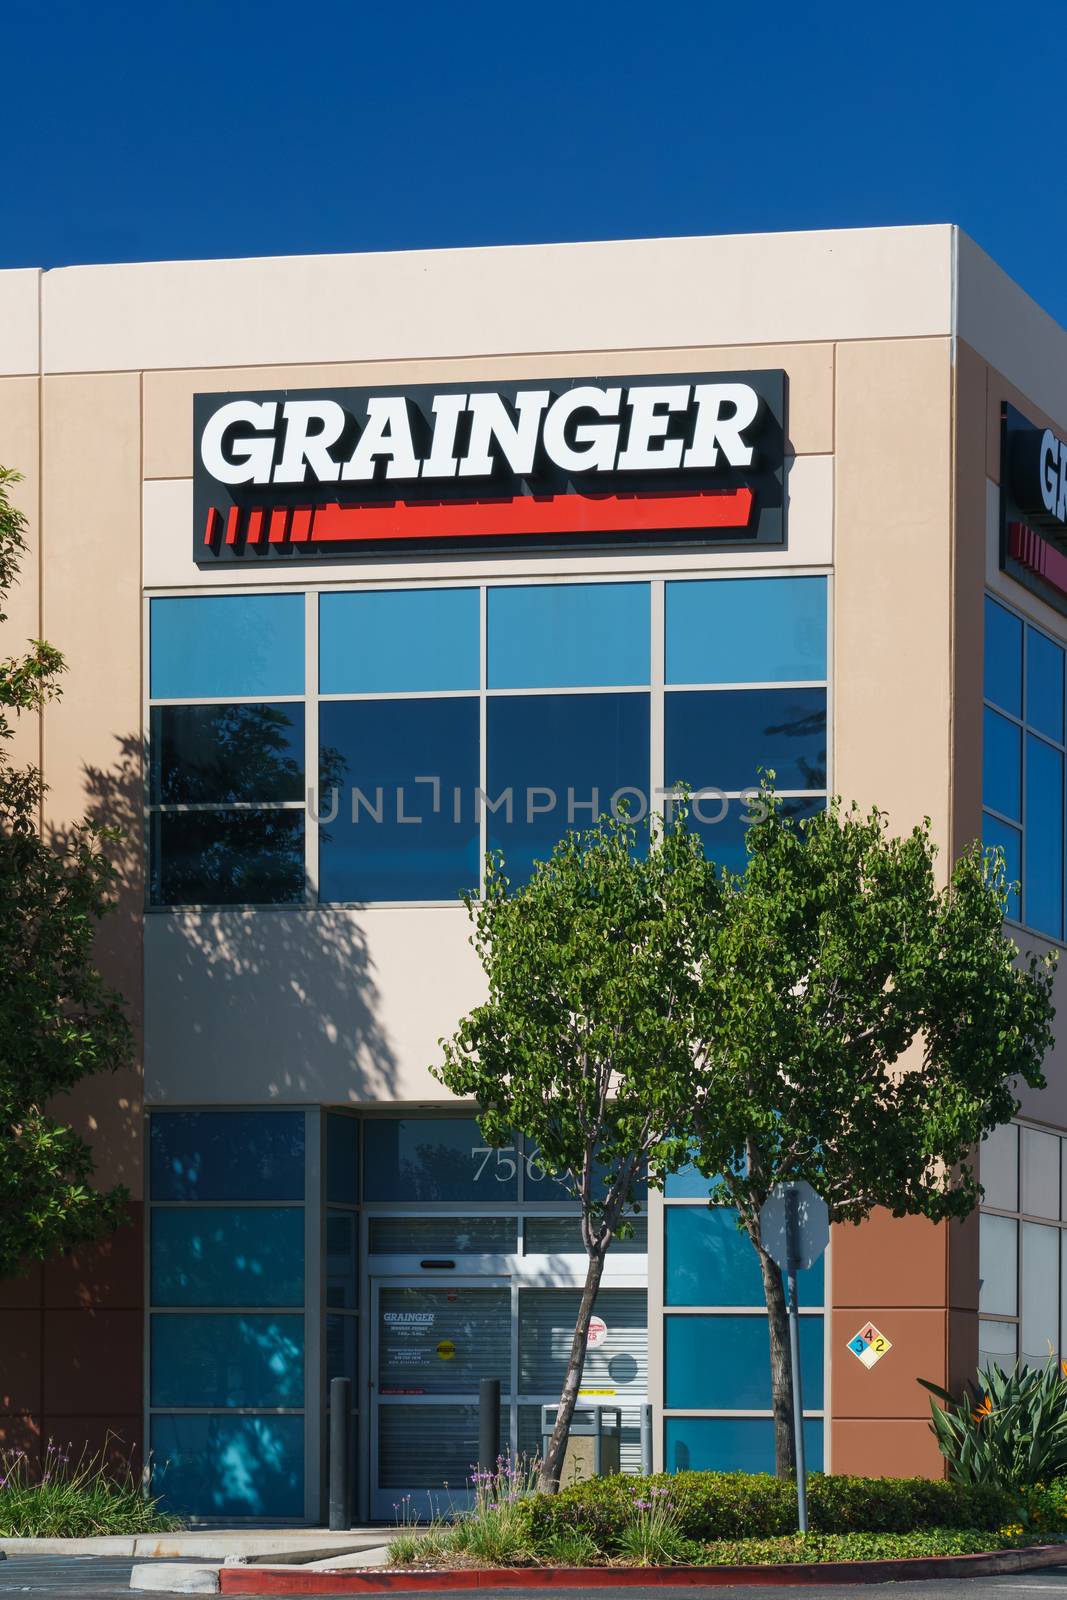 BURBANK, CA/USA - SEPTEMBER 19, 2015: Grainger warehouse facility. W. W. Grainger, Inc. is a Fortune 500 industrial supply company.